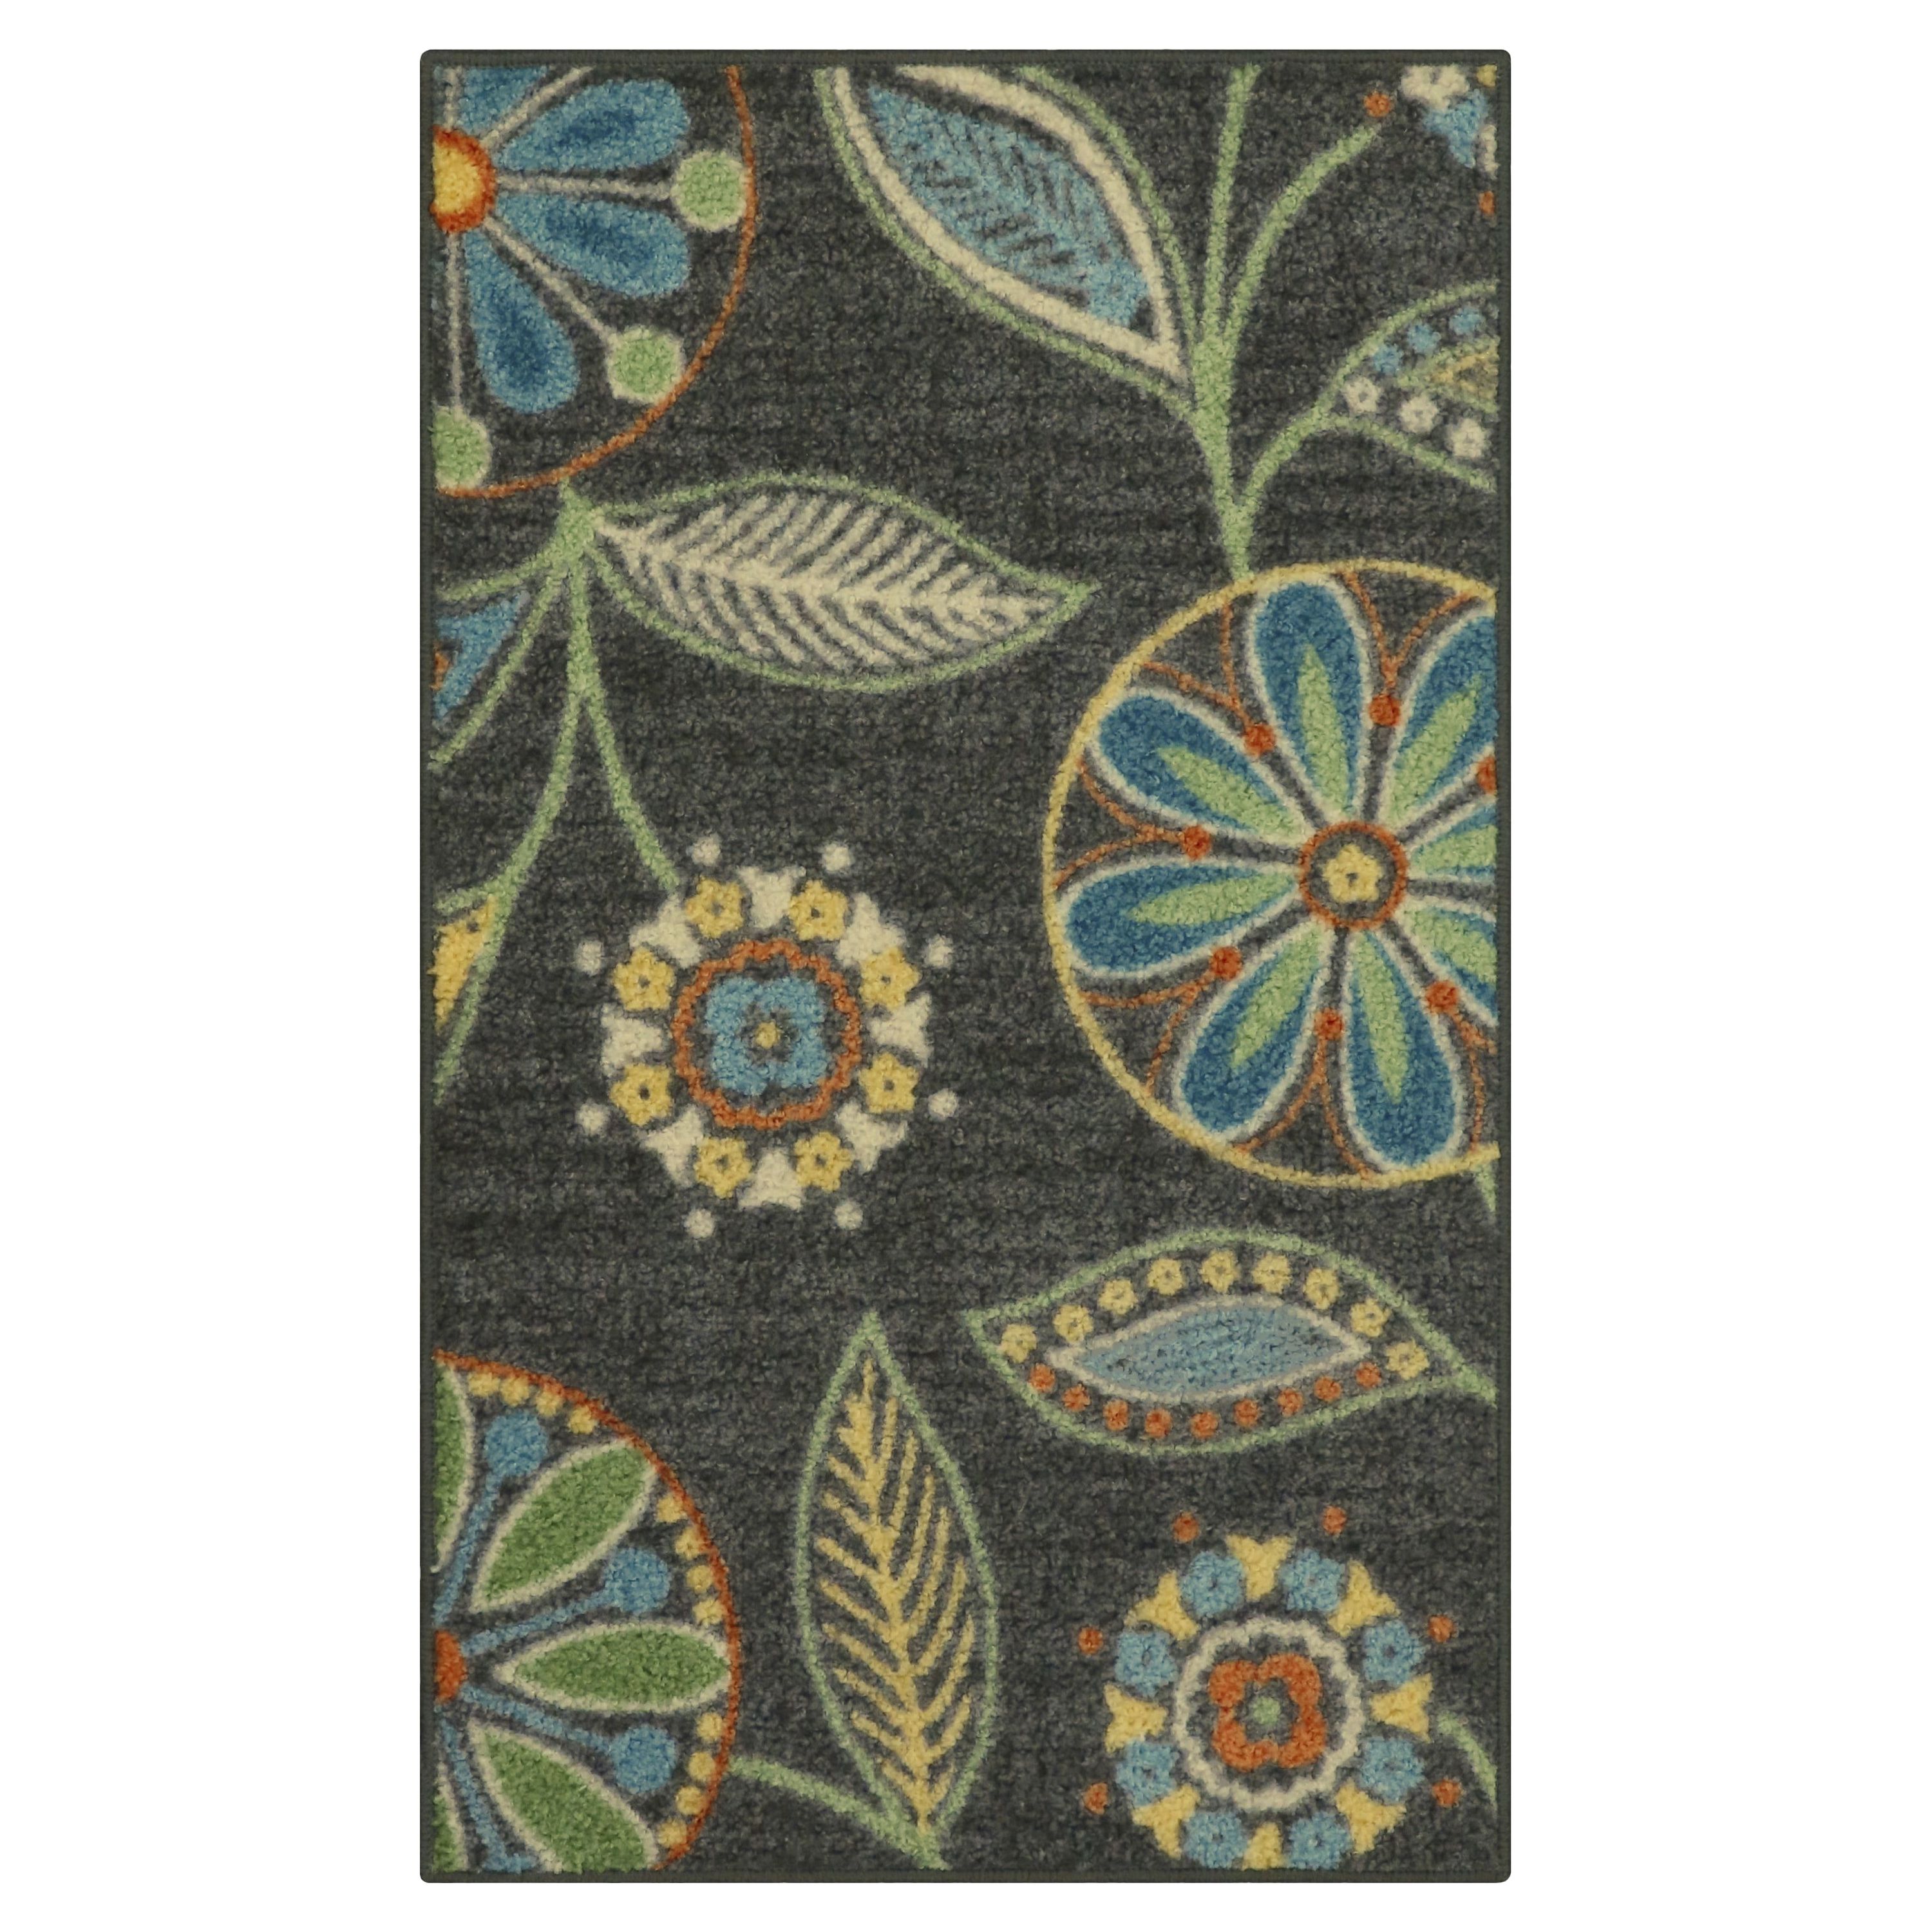 Maples Rugs Traditional Minerva Gray Multi Floral Indoor Accent Rug, 1'8"x2'10" - image 1 of 7